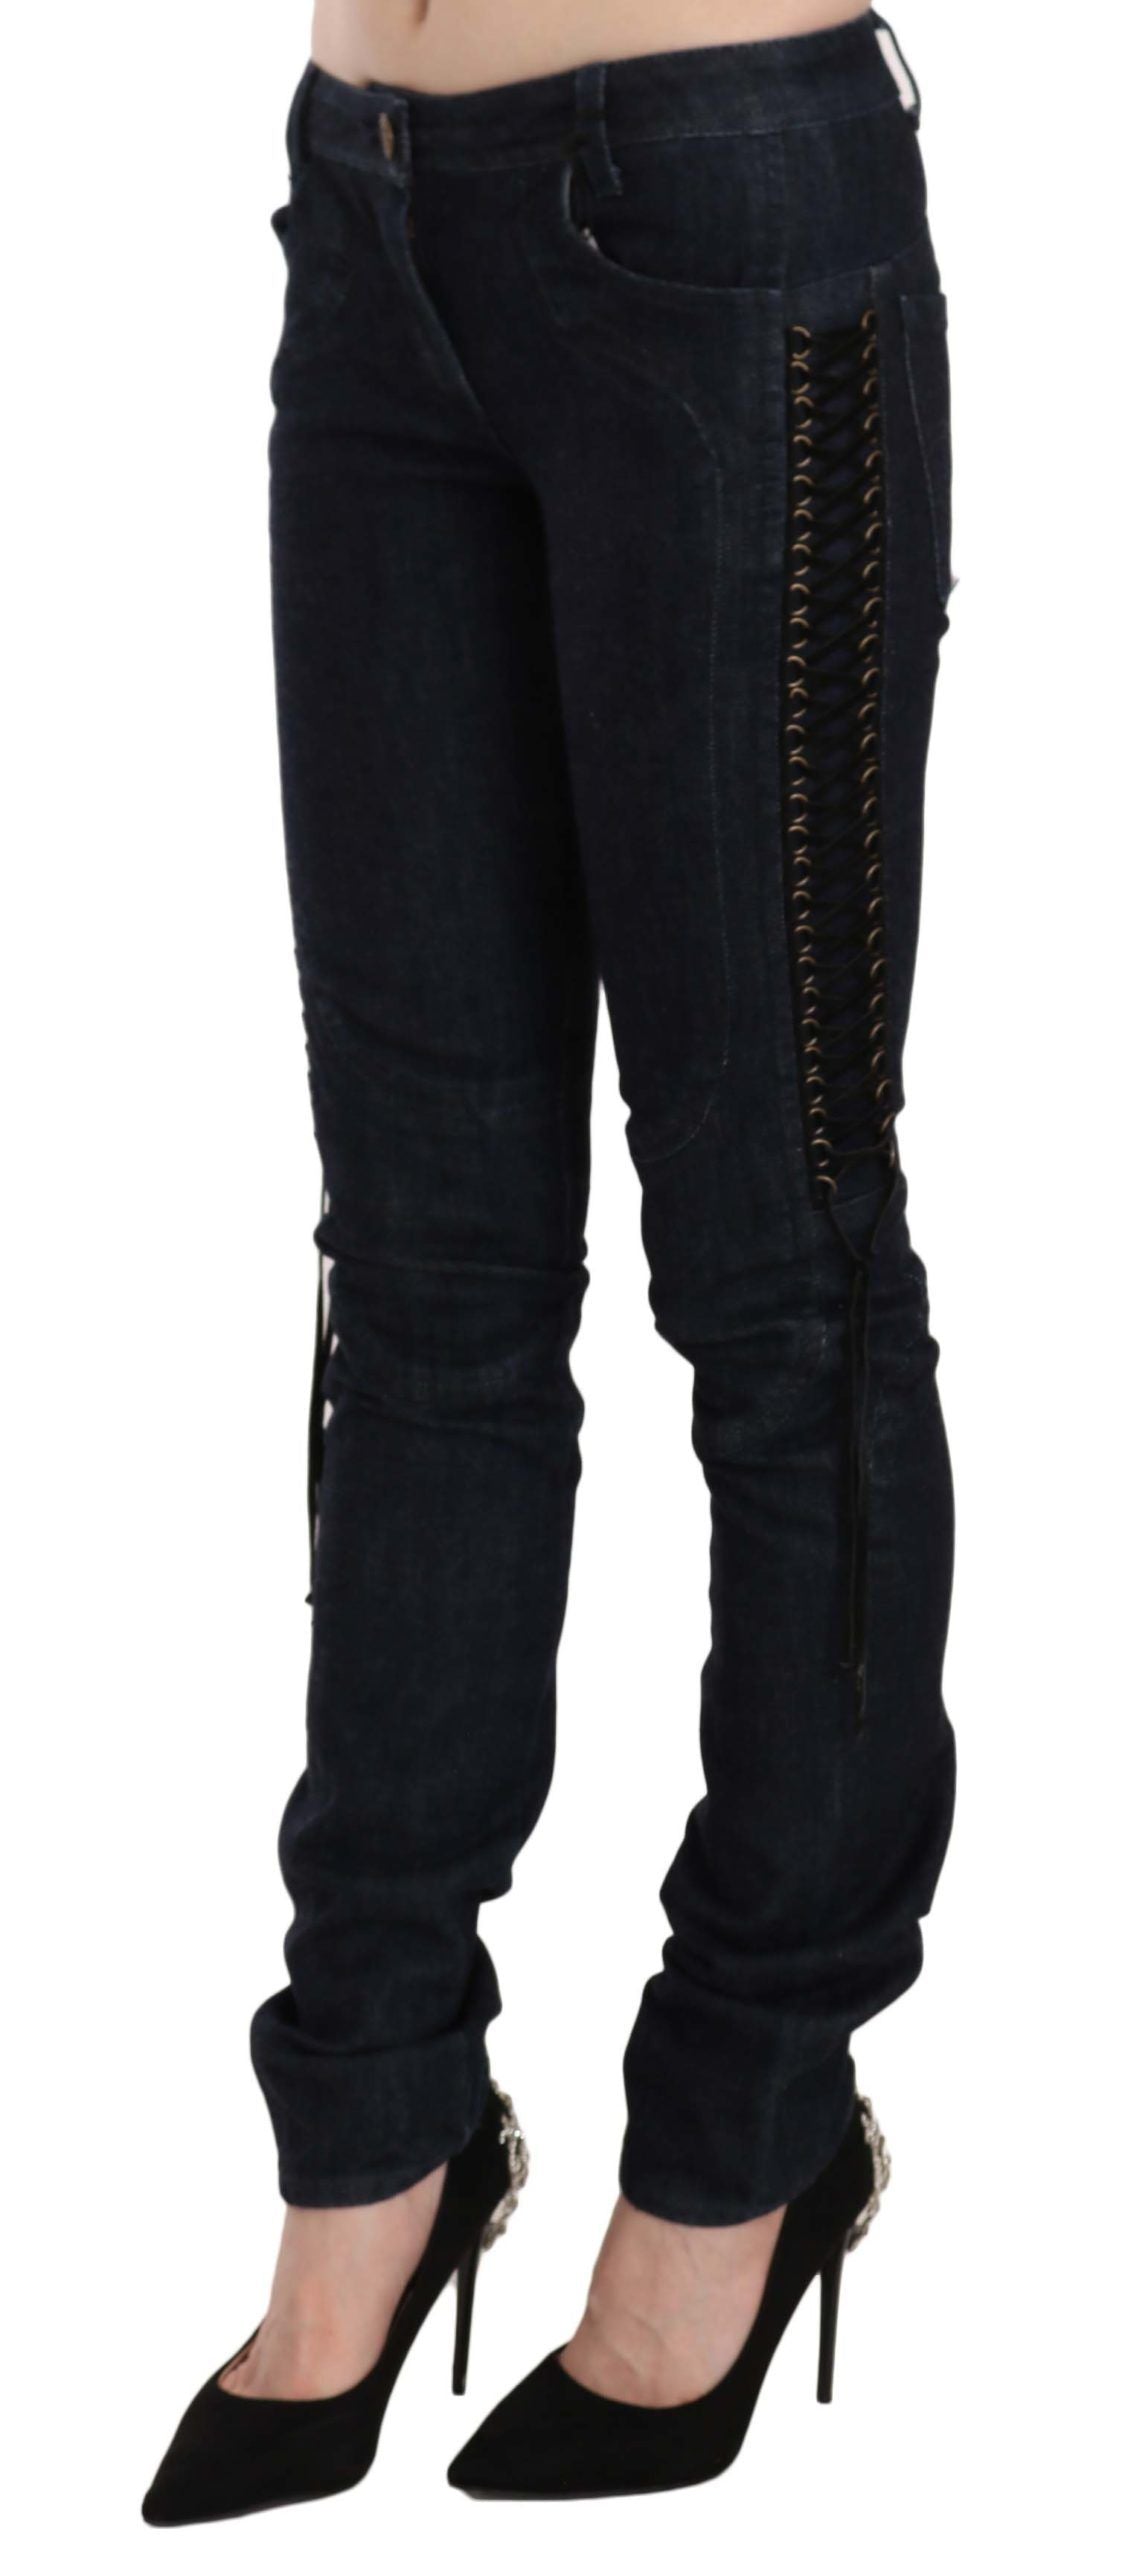 Black Low Waist Skinny Trousers Braided String Pants - Designed by Just Cavalli Available to Buy at a Discounted Price on Moon Behind The Hill Online Designer Discount Store